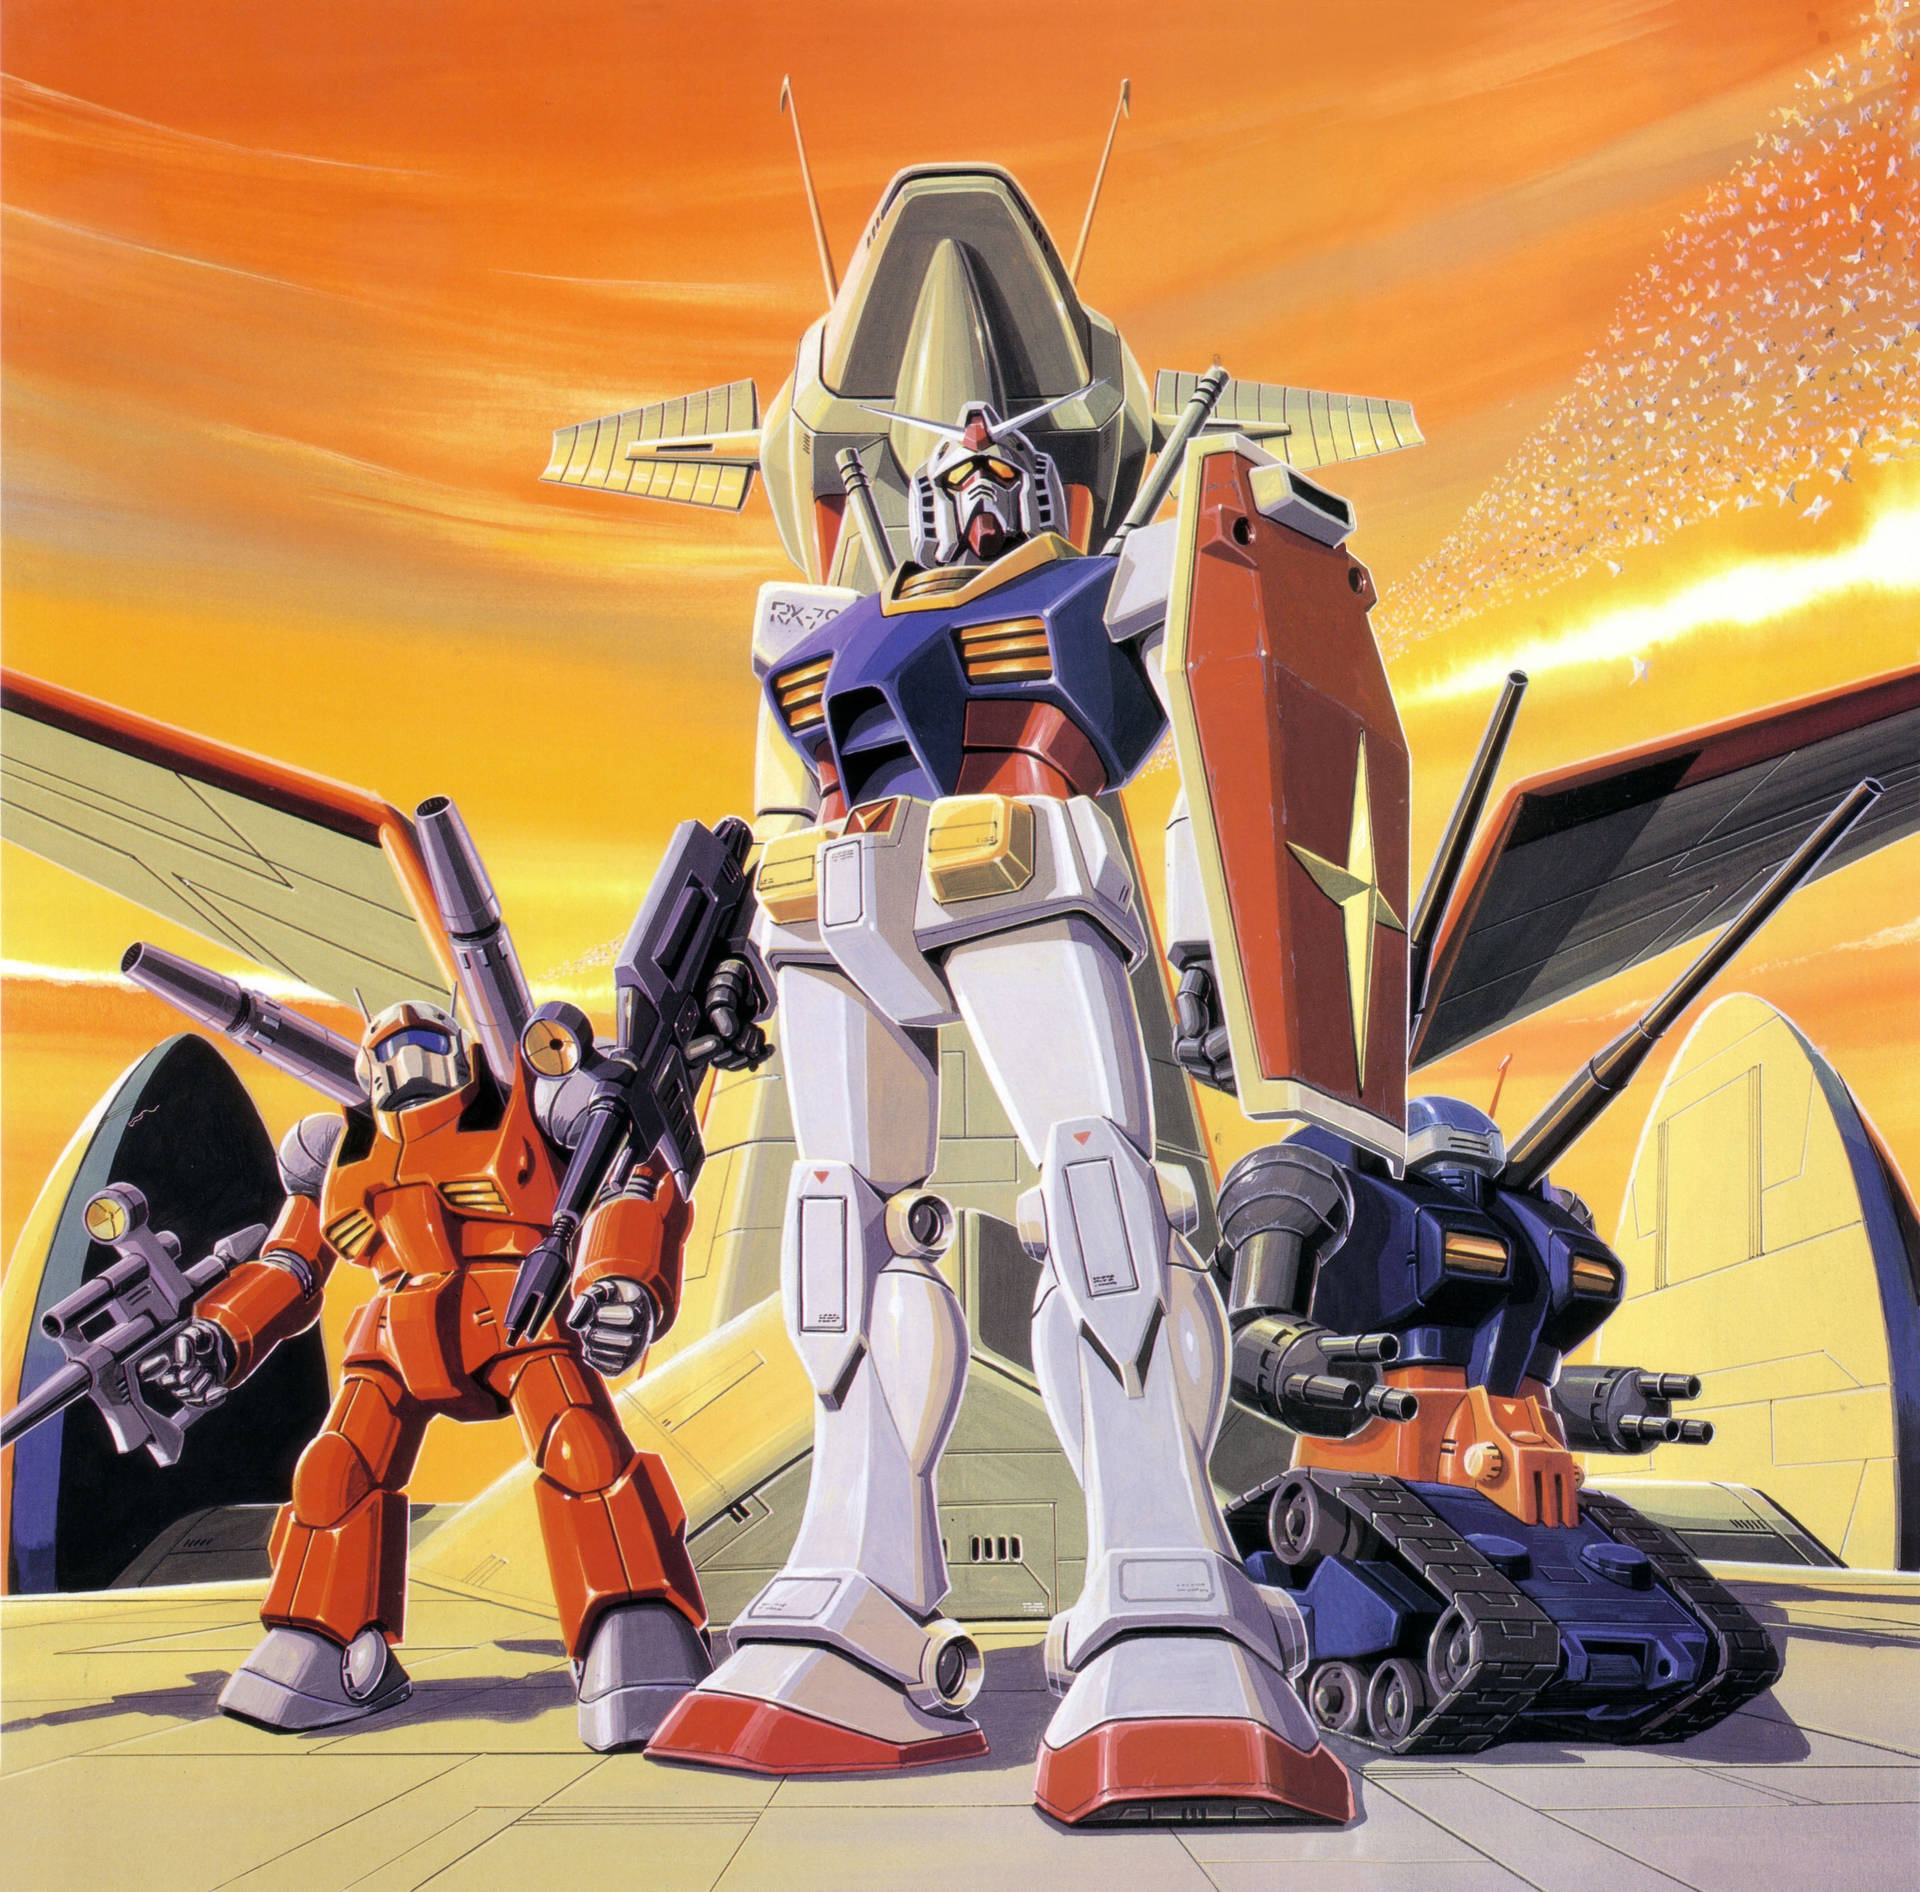 Heroic Alliance - Mobile Suit Gundam And His Team Background